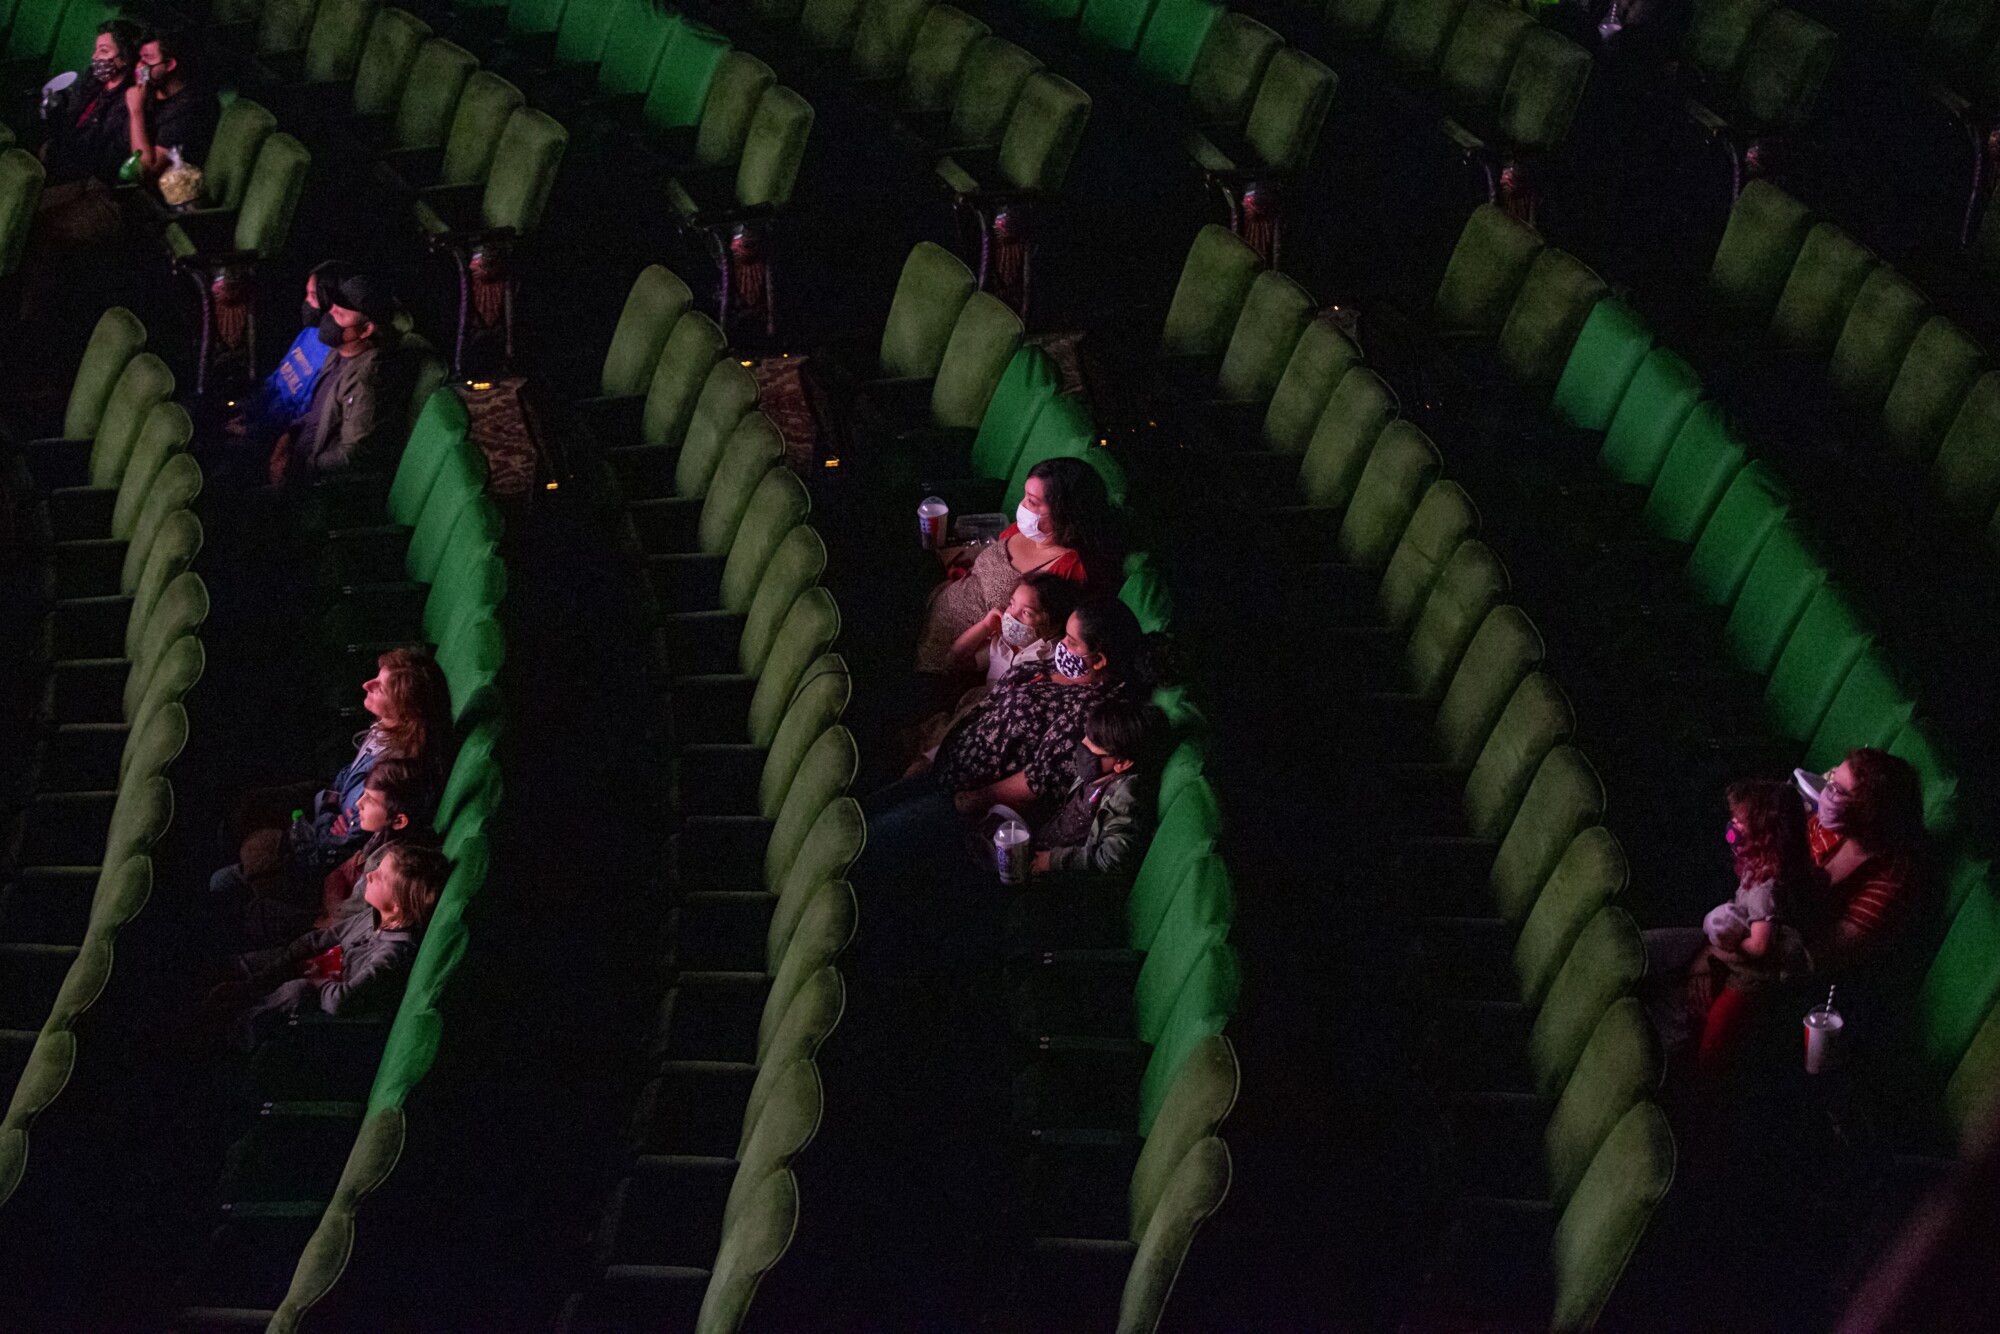 People sit spaced out in a movie theater.